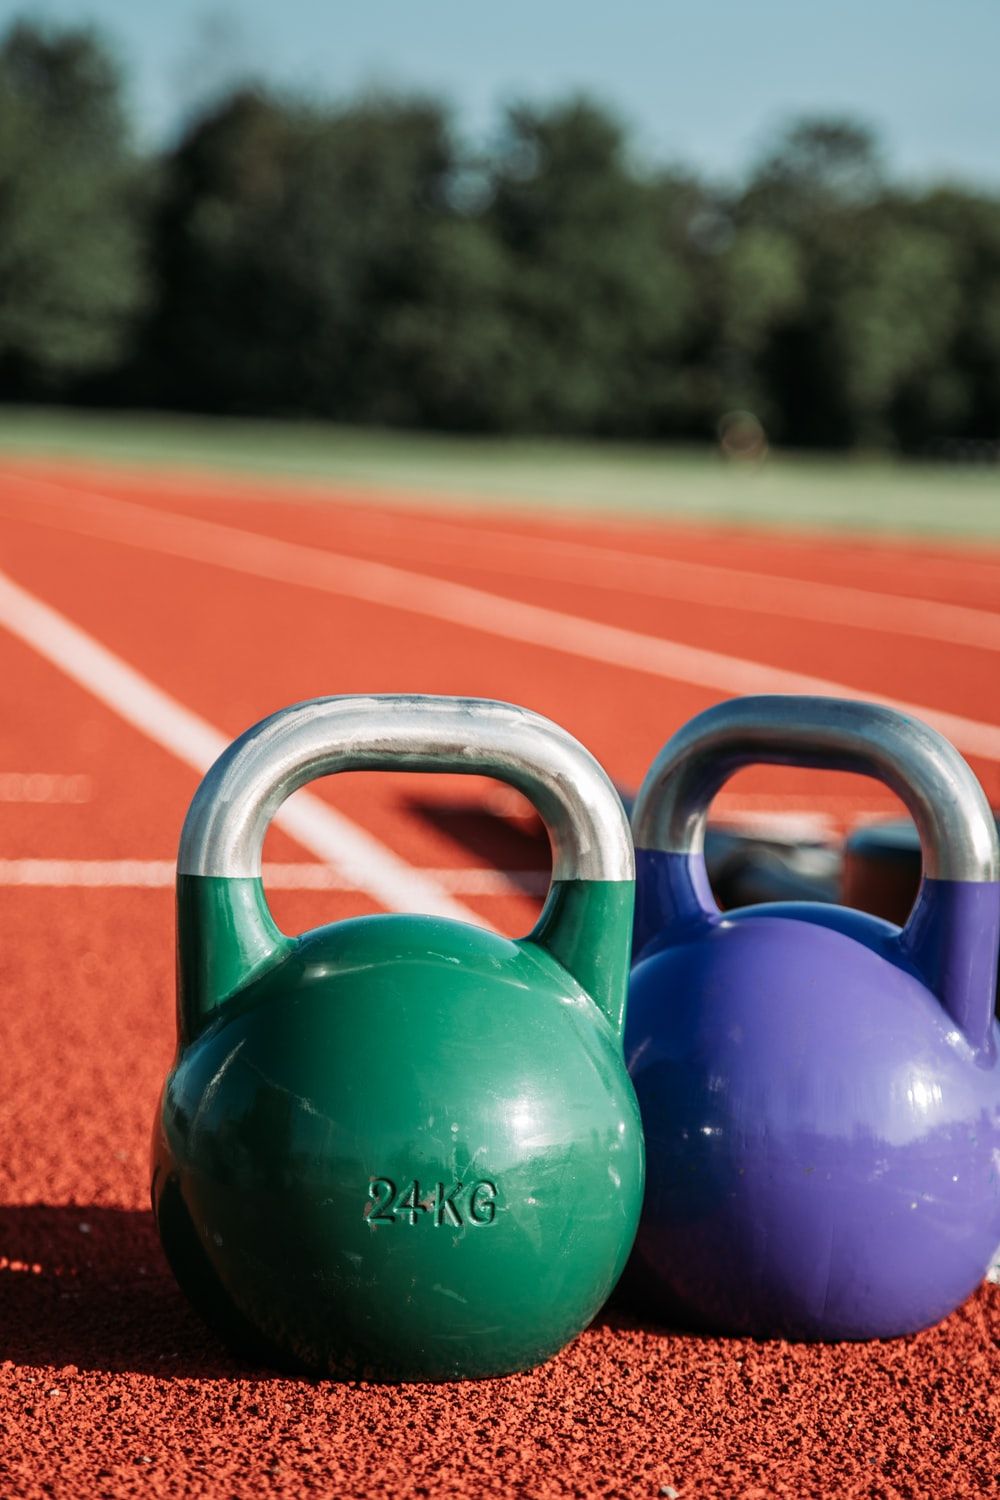 Kettlebell Picture. Download Free Image